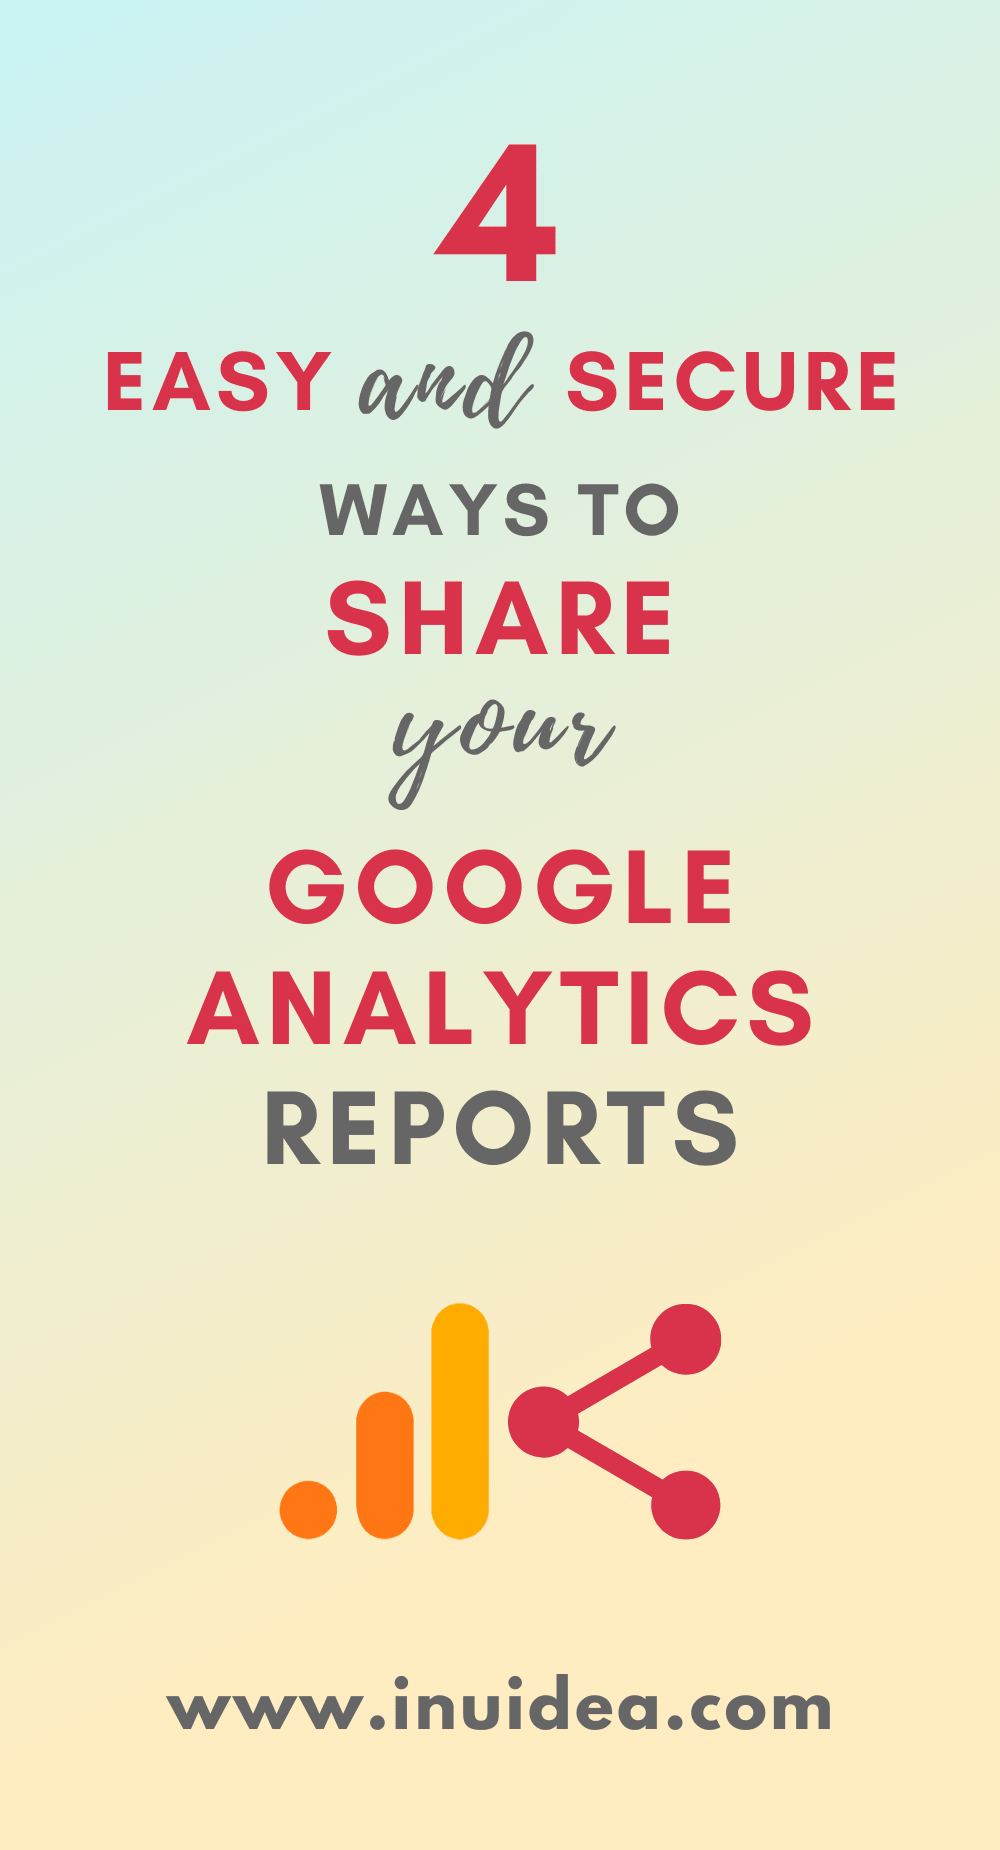 4 Easy and Secure Ways to Share Your Google Analytics Reports with Others